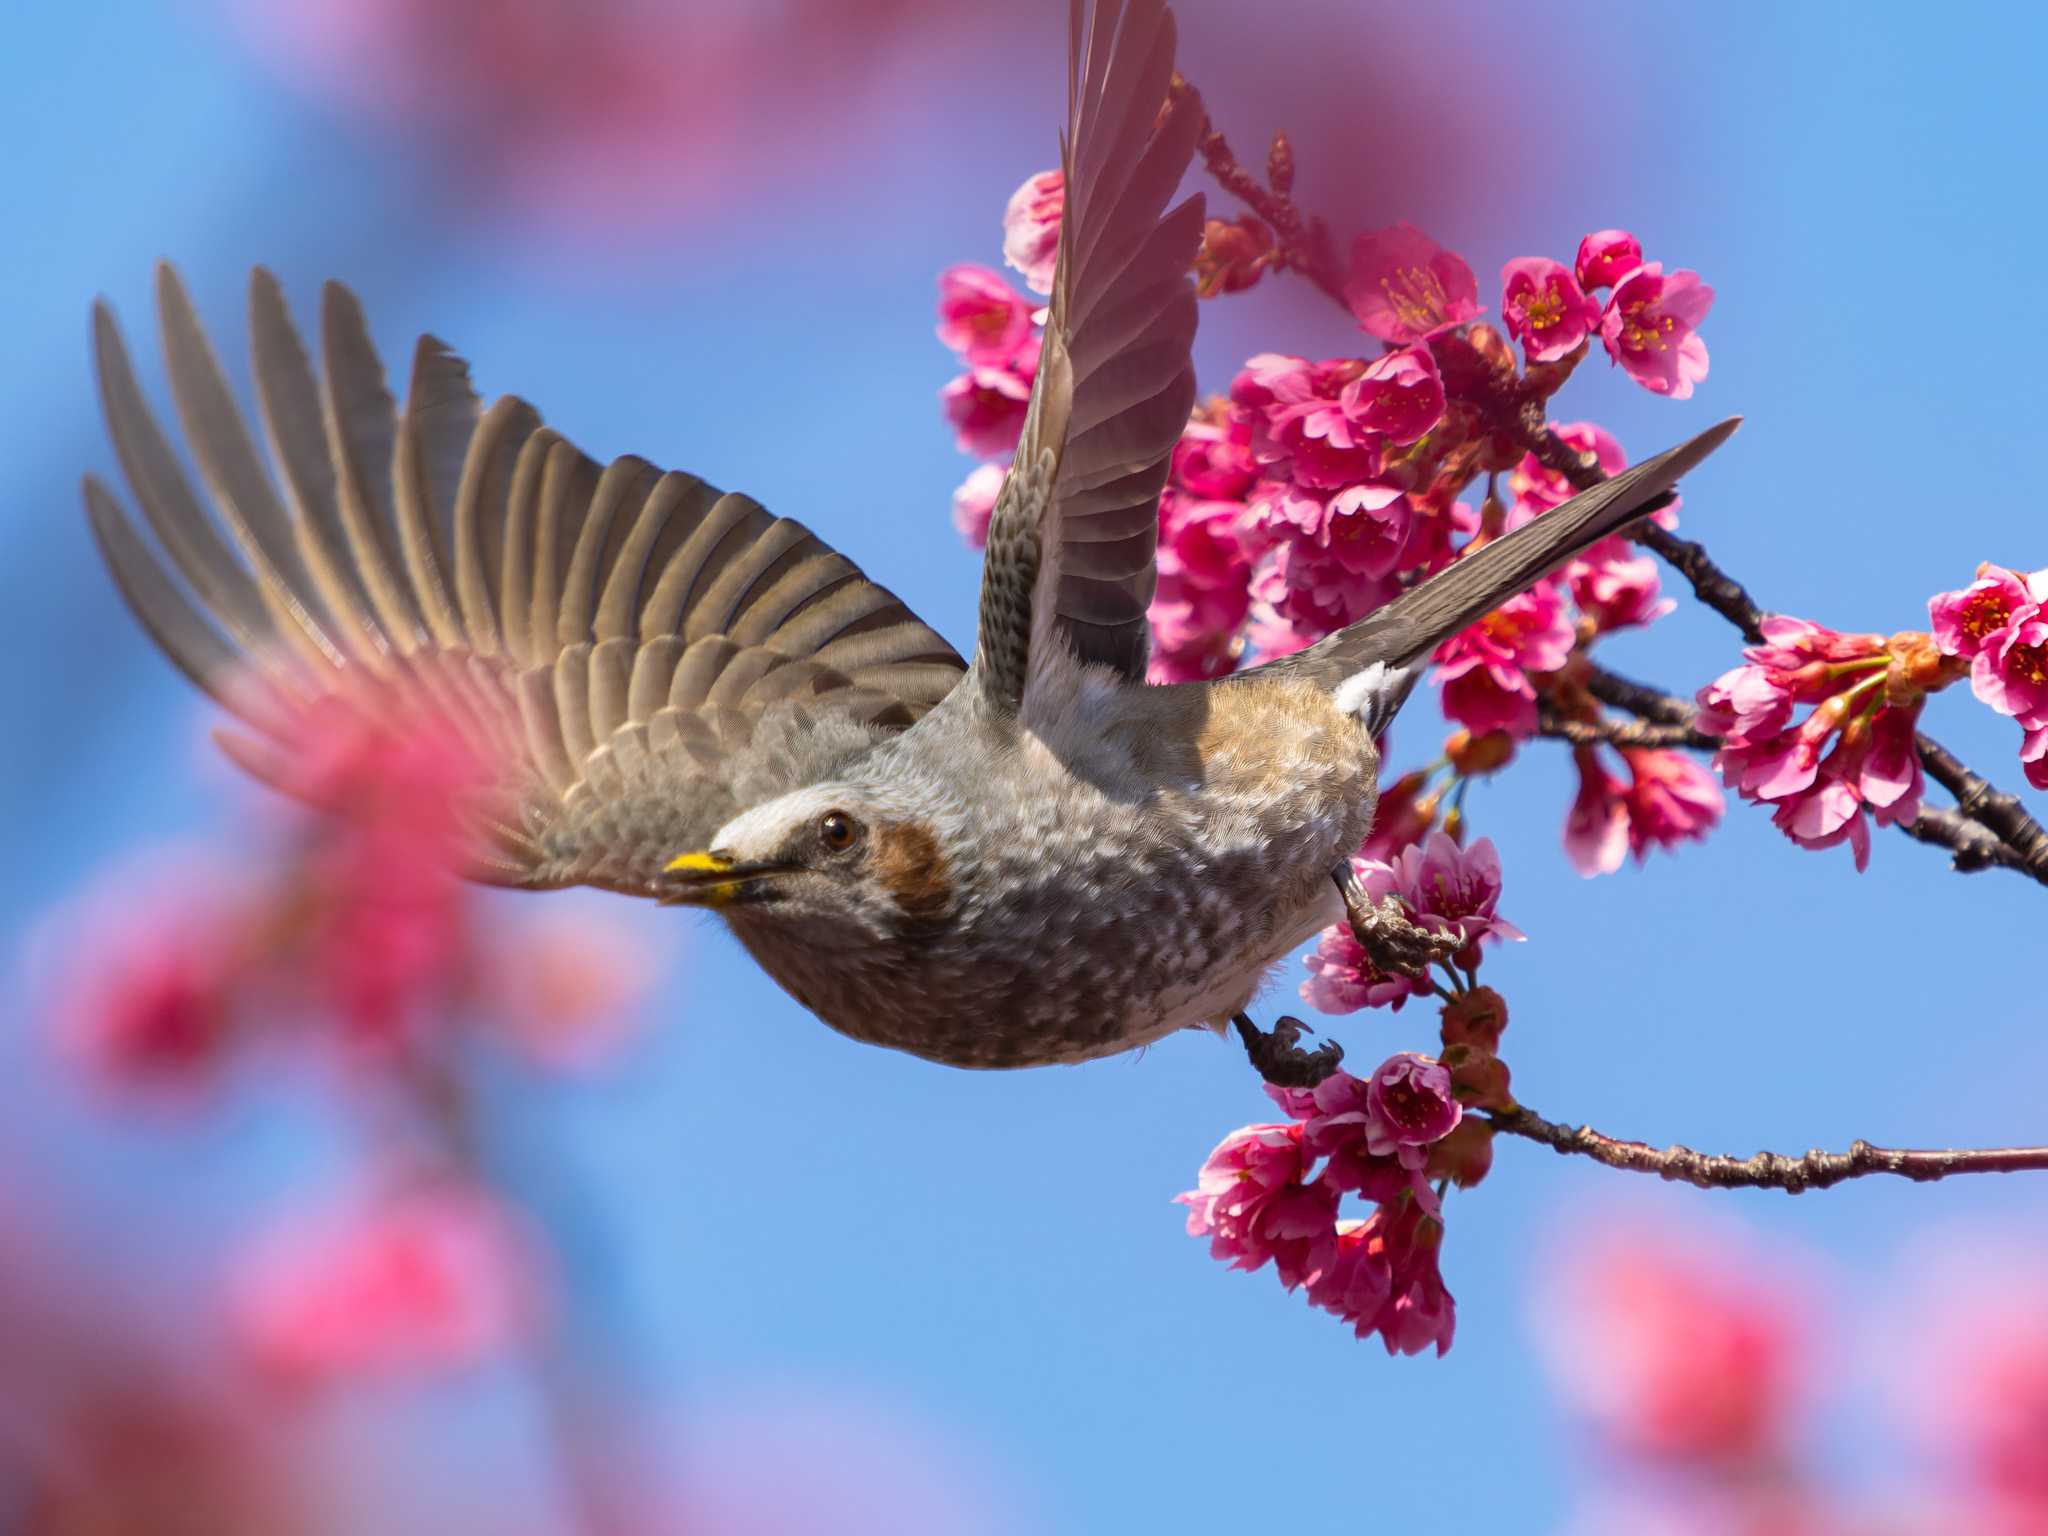 Photo of Brown-eared Bulbul at 浦上川遊歩道(長崎市) by ここは長崎